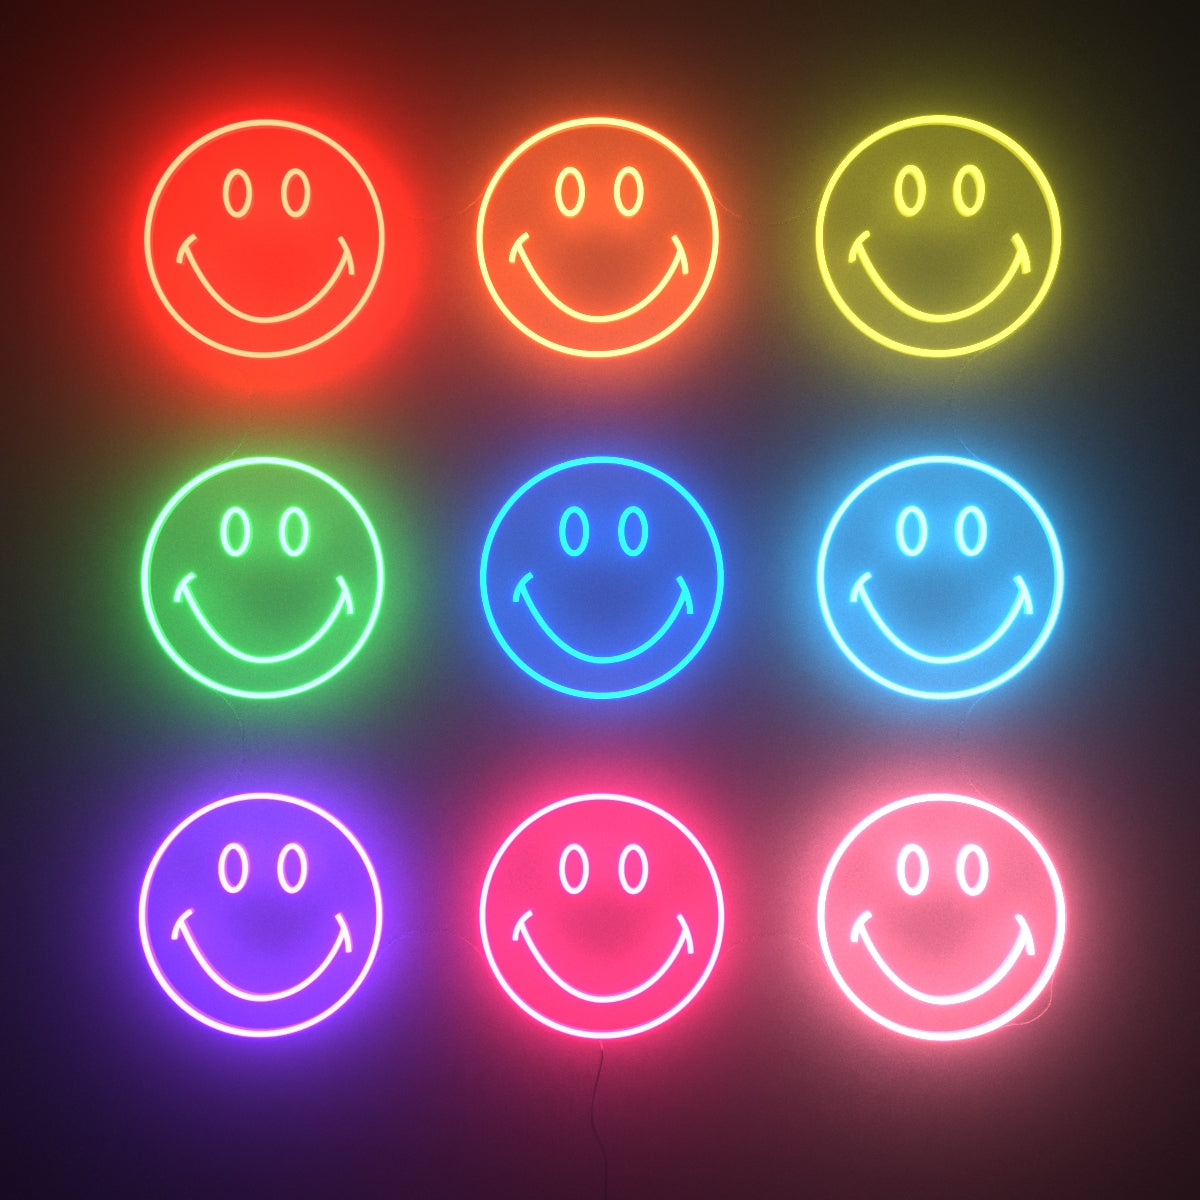 Smiley Wall by Smiley®, Neon Tabela - Neonbir